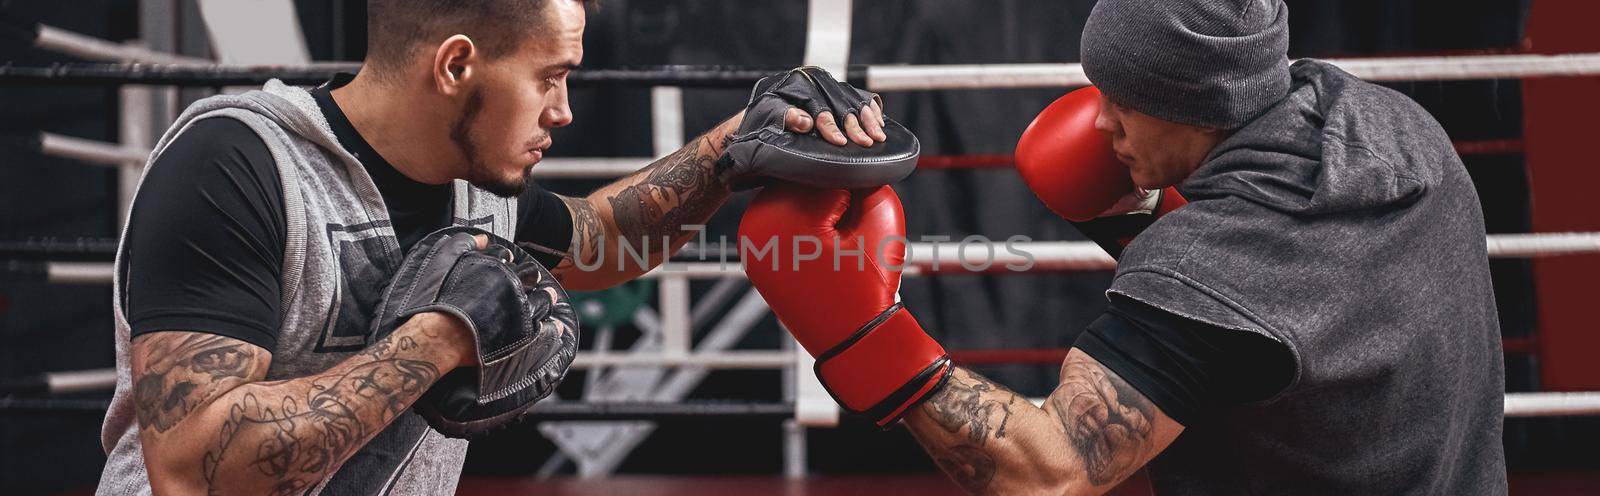 Close-up of confident muscular athlete in red gloves training on boxing paws with partner in black boxing gym. Horizontal photo